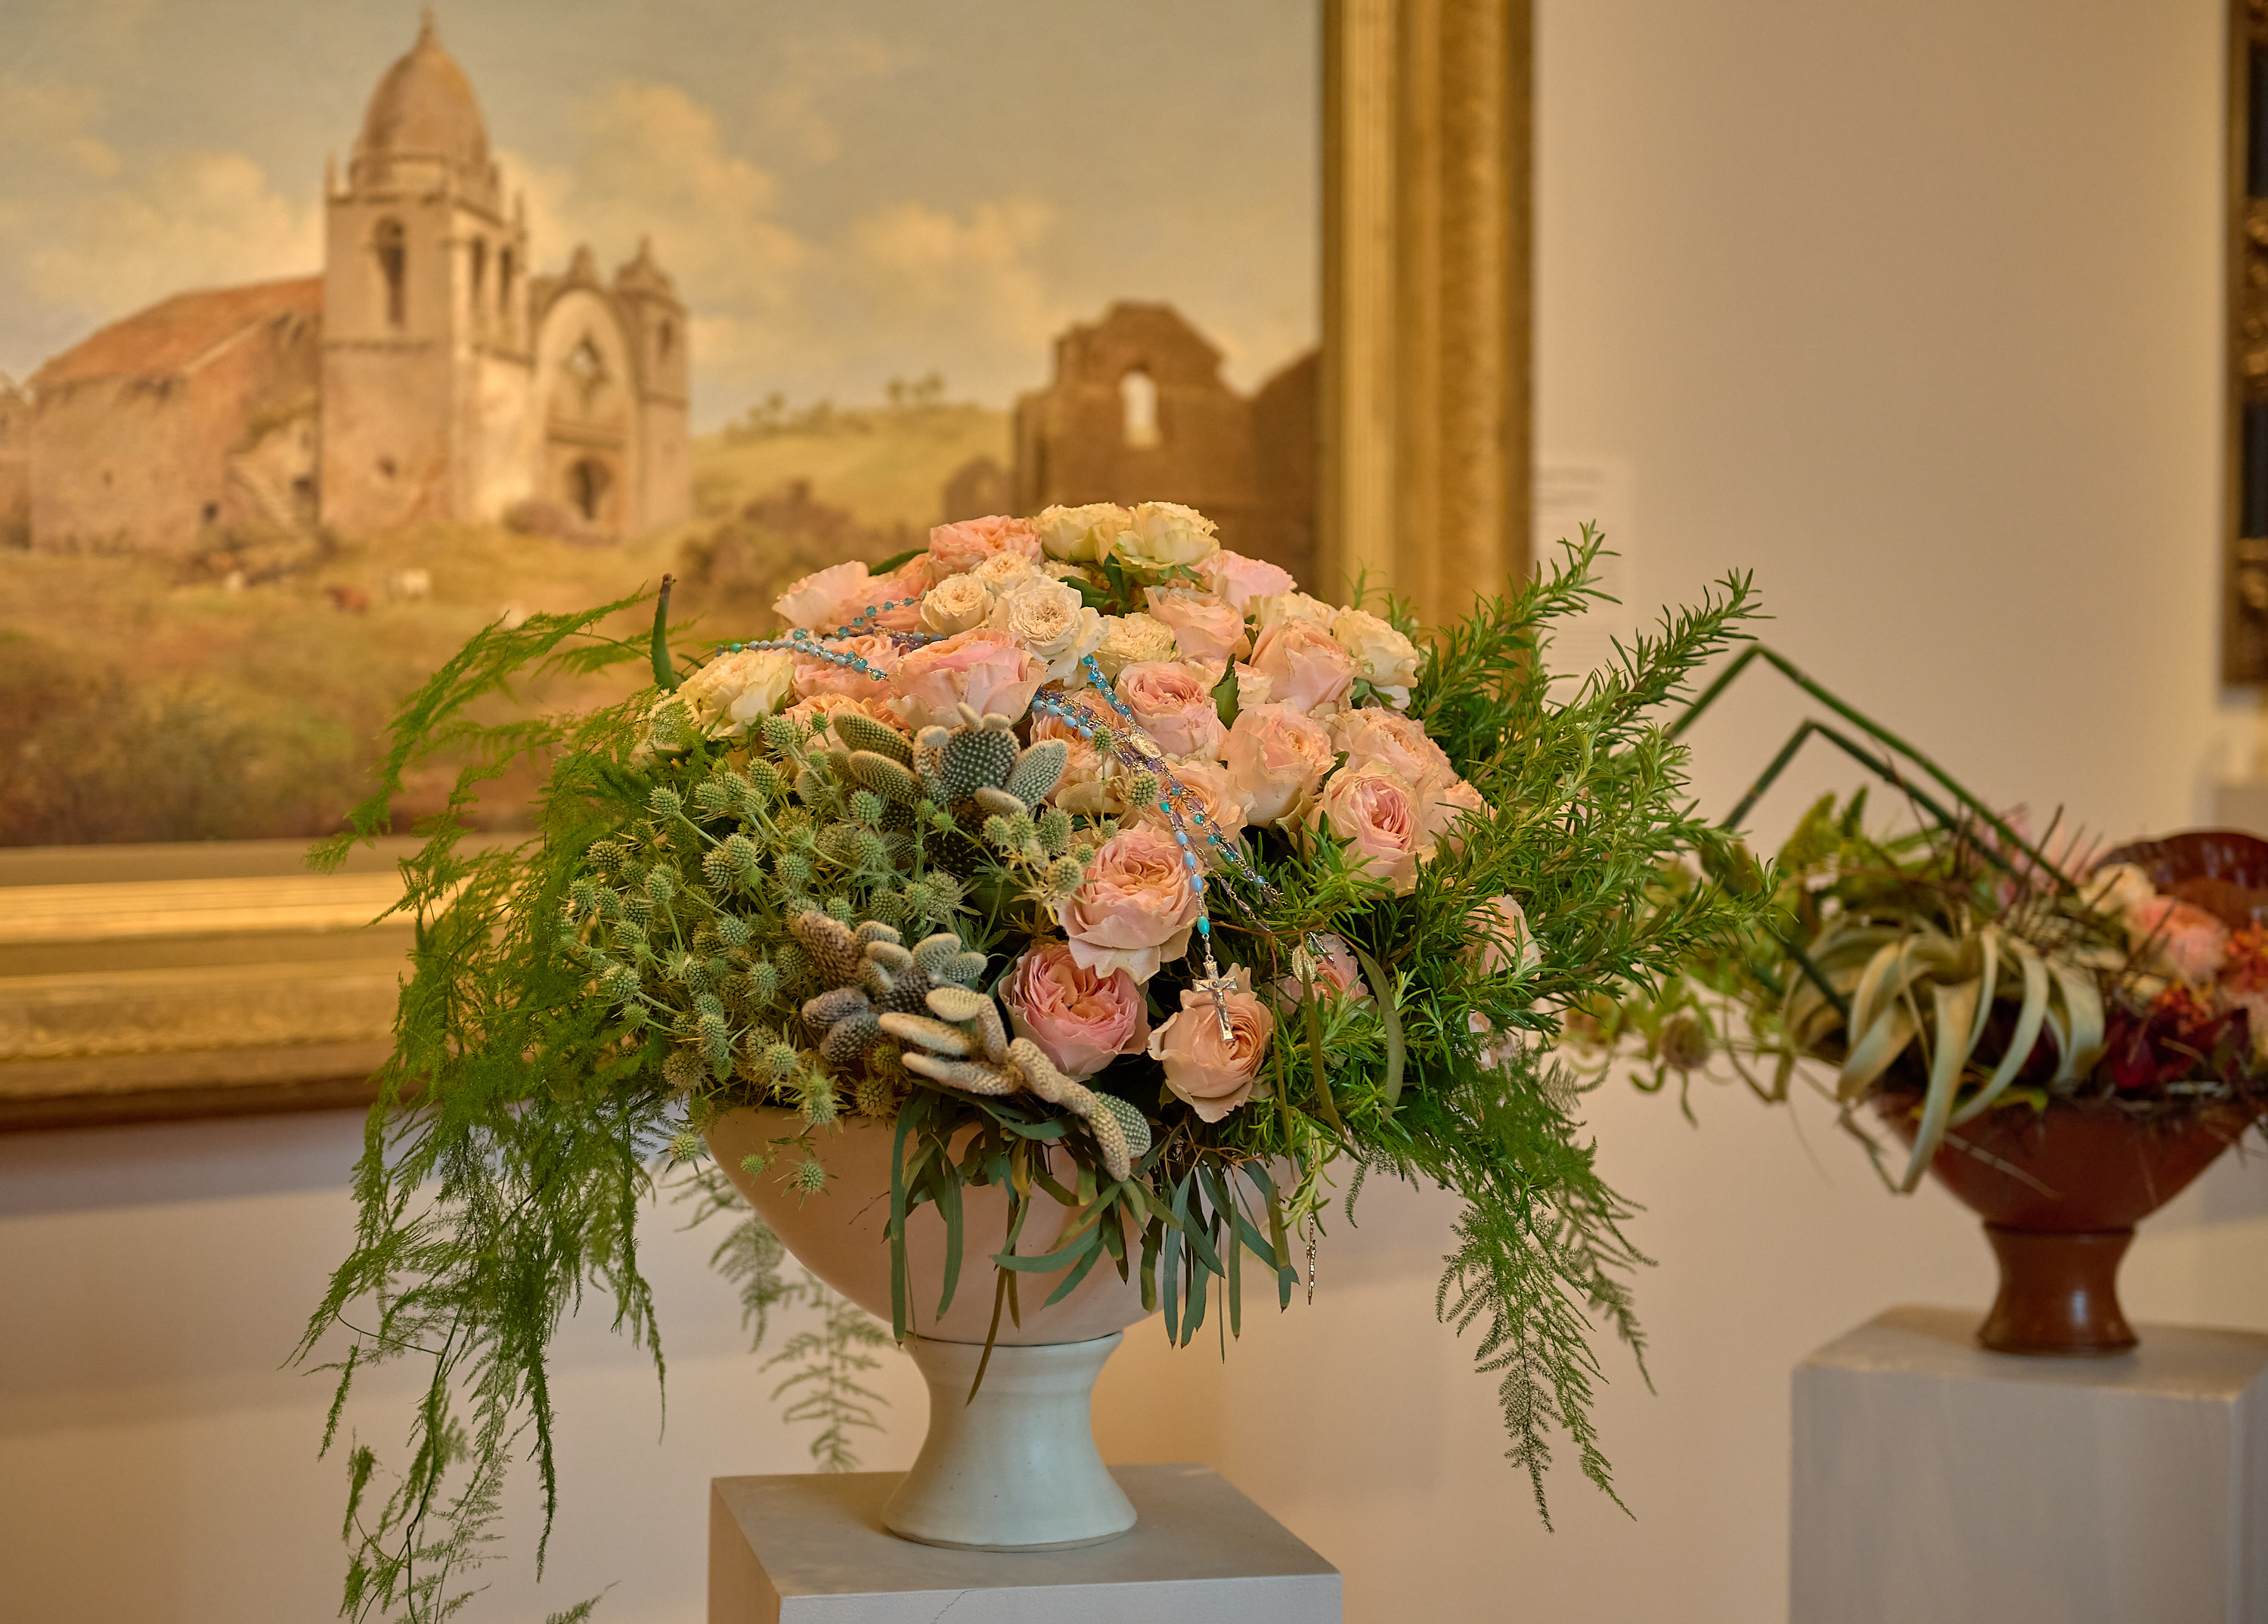 A floral arrangement with pink roses and green foliage in a white pedestal vase is in the foreground. A painting of an old building is in the background.